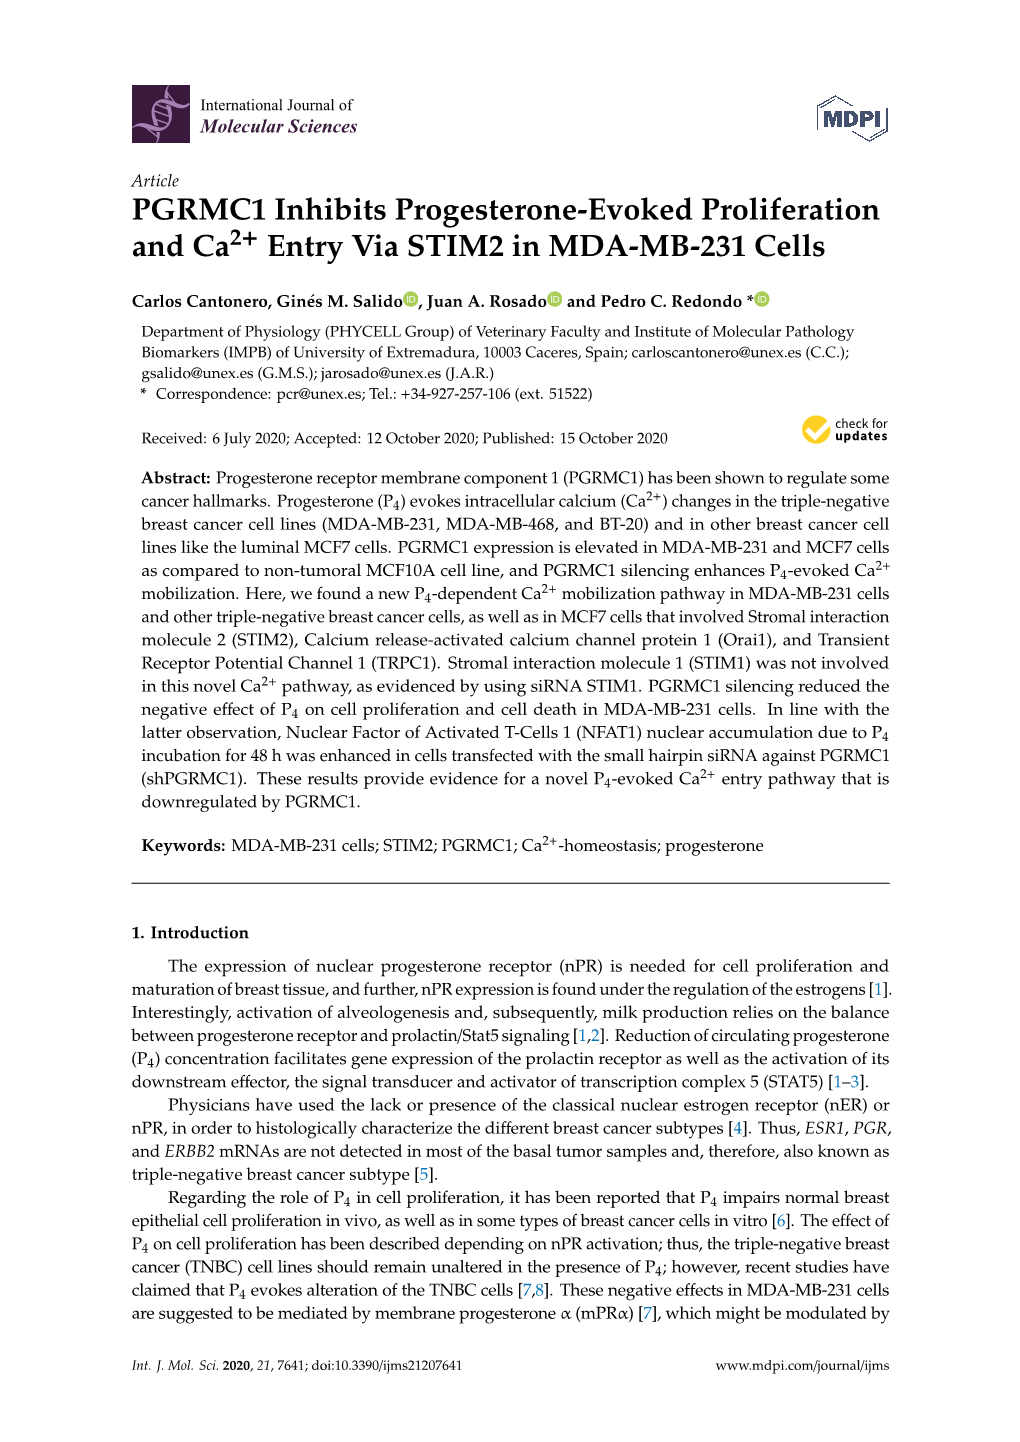 PGRMC1 Inhibits Progesterone-Evoked Proliferation and Ca2+ Entry Via STIM2 in MDA-MB-231 Cells